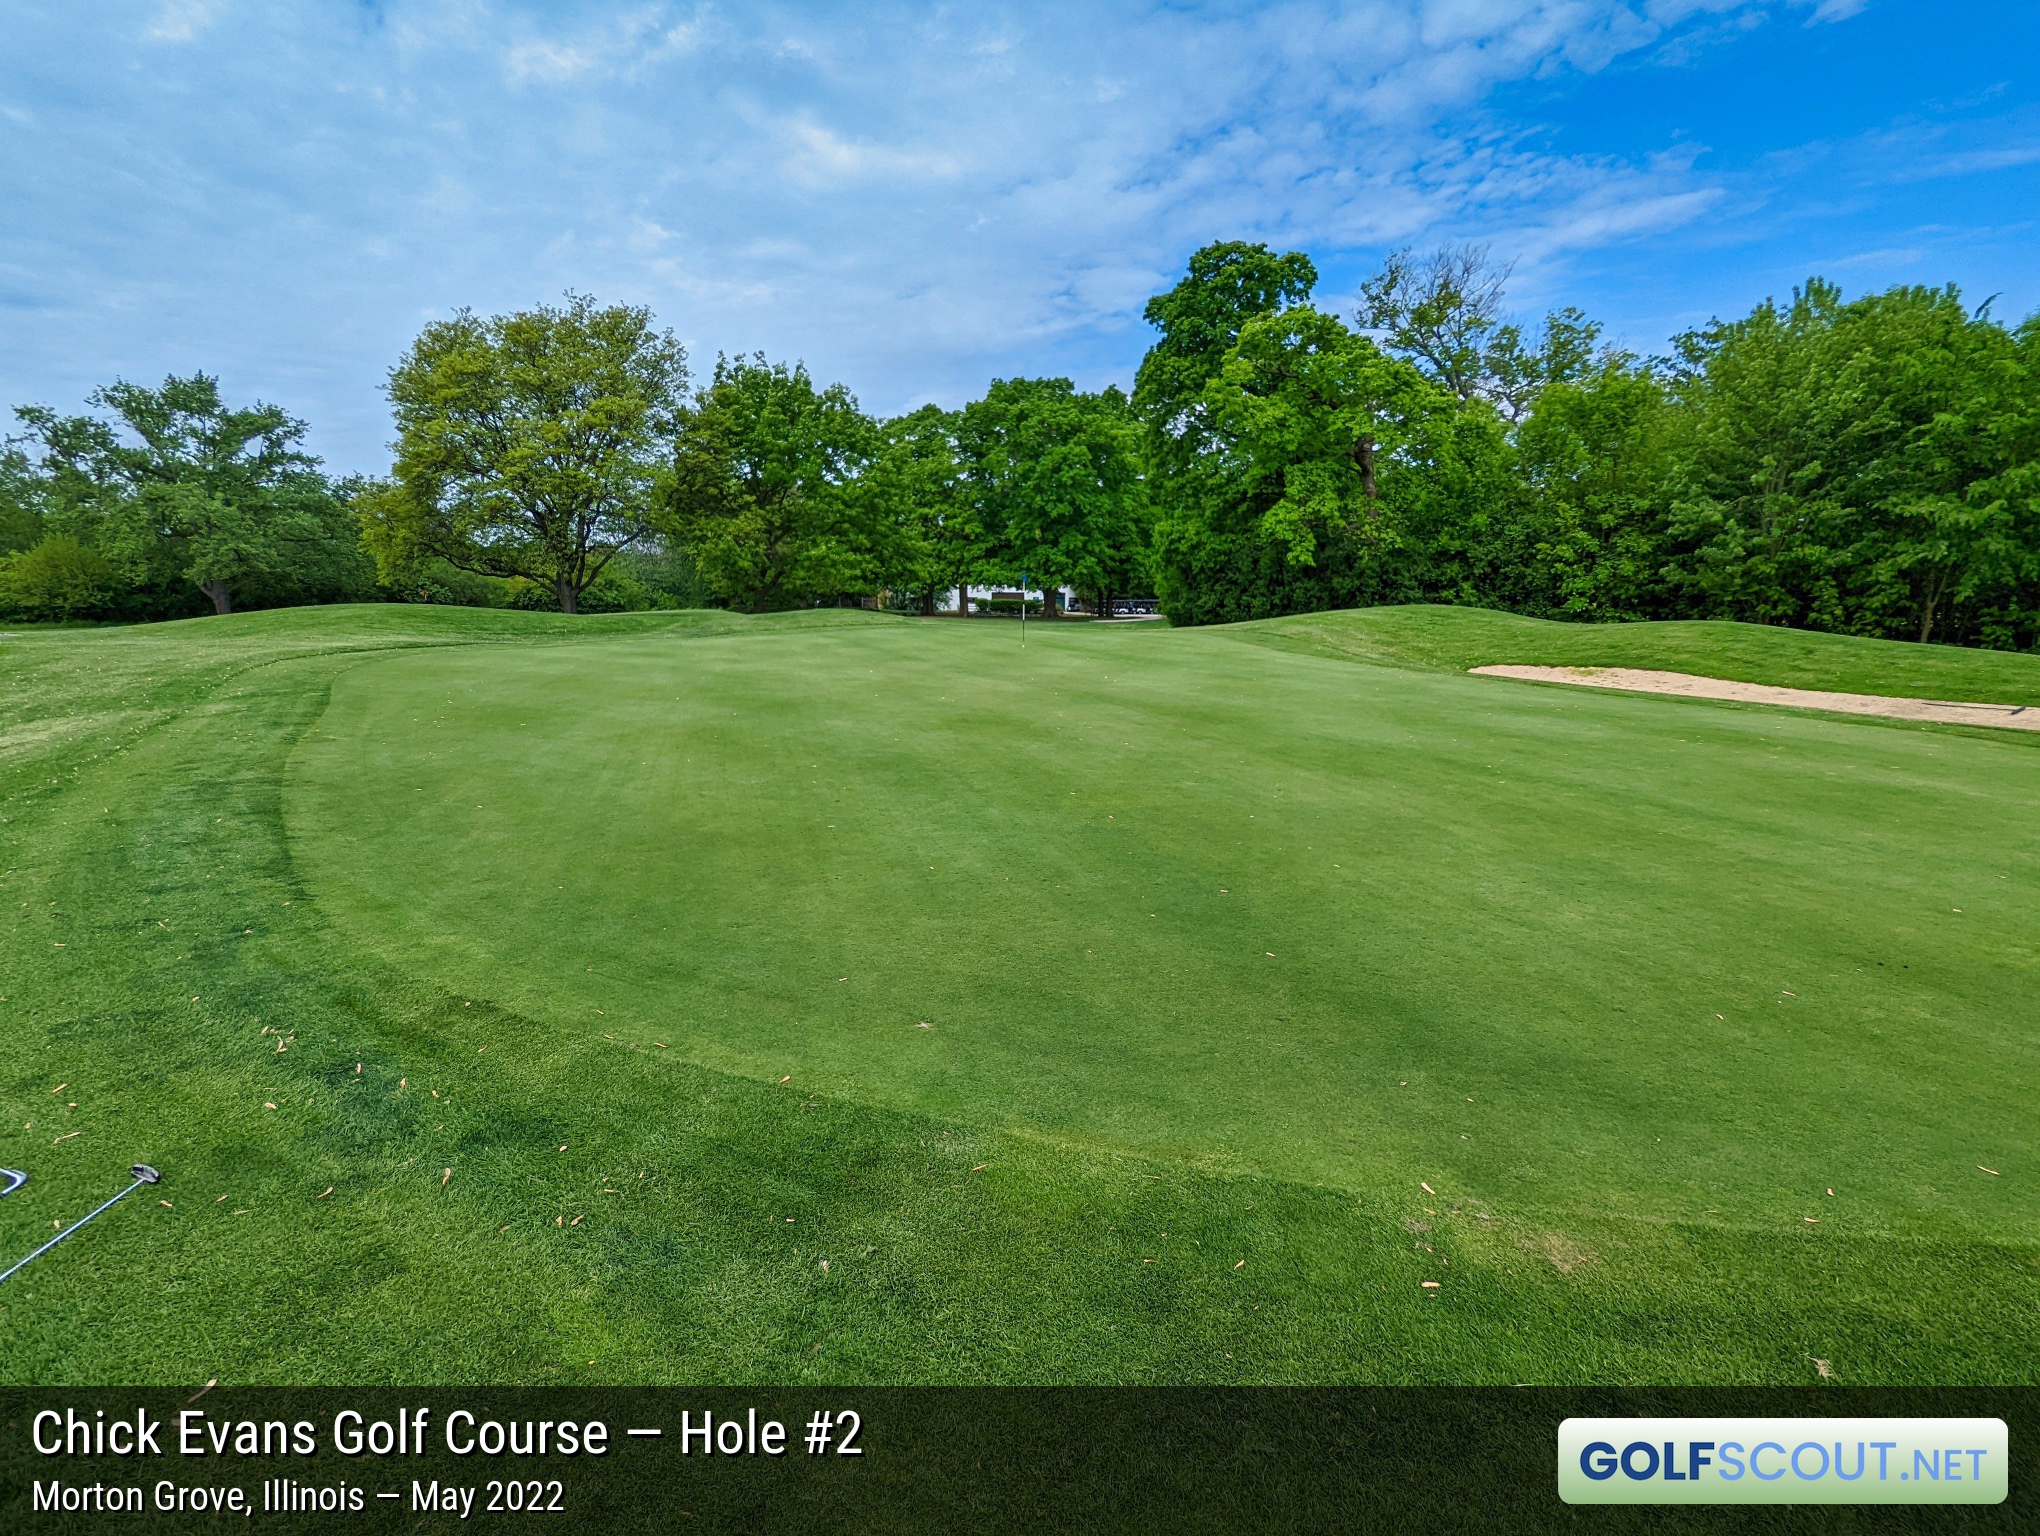 Photo of hole #2 at Chick Evans Golf Course in Morton Grove, Illinois. 